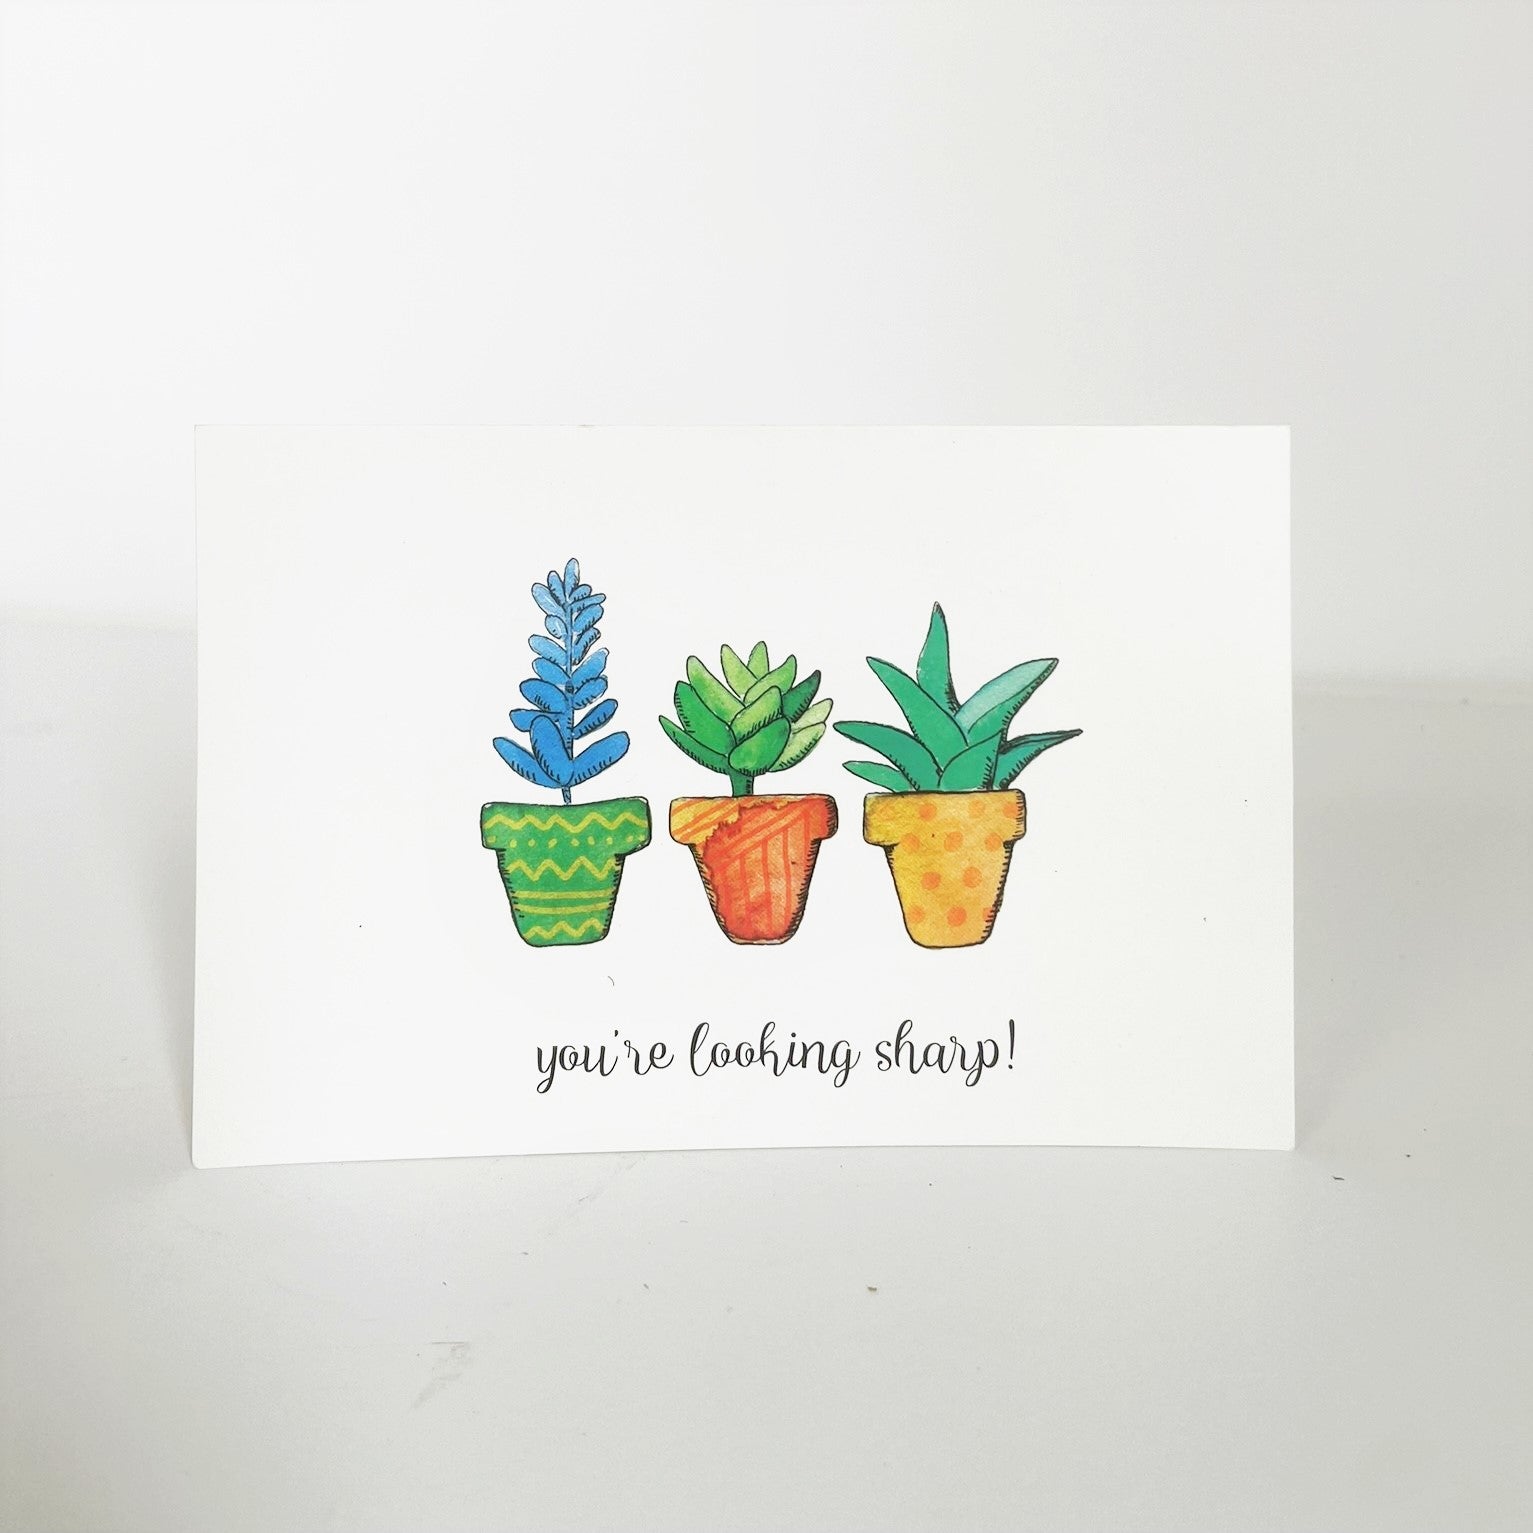 Looking Sharp - Succulents & Cacti Card